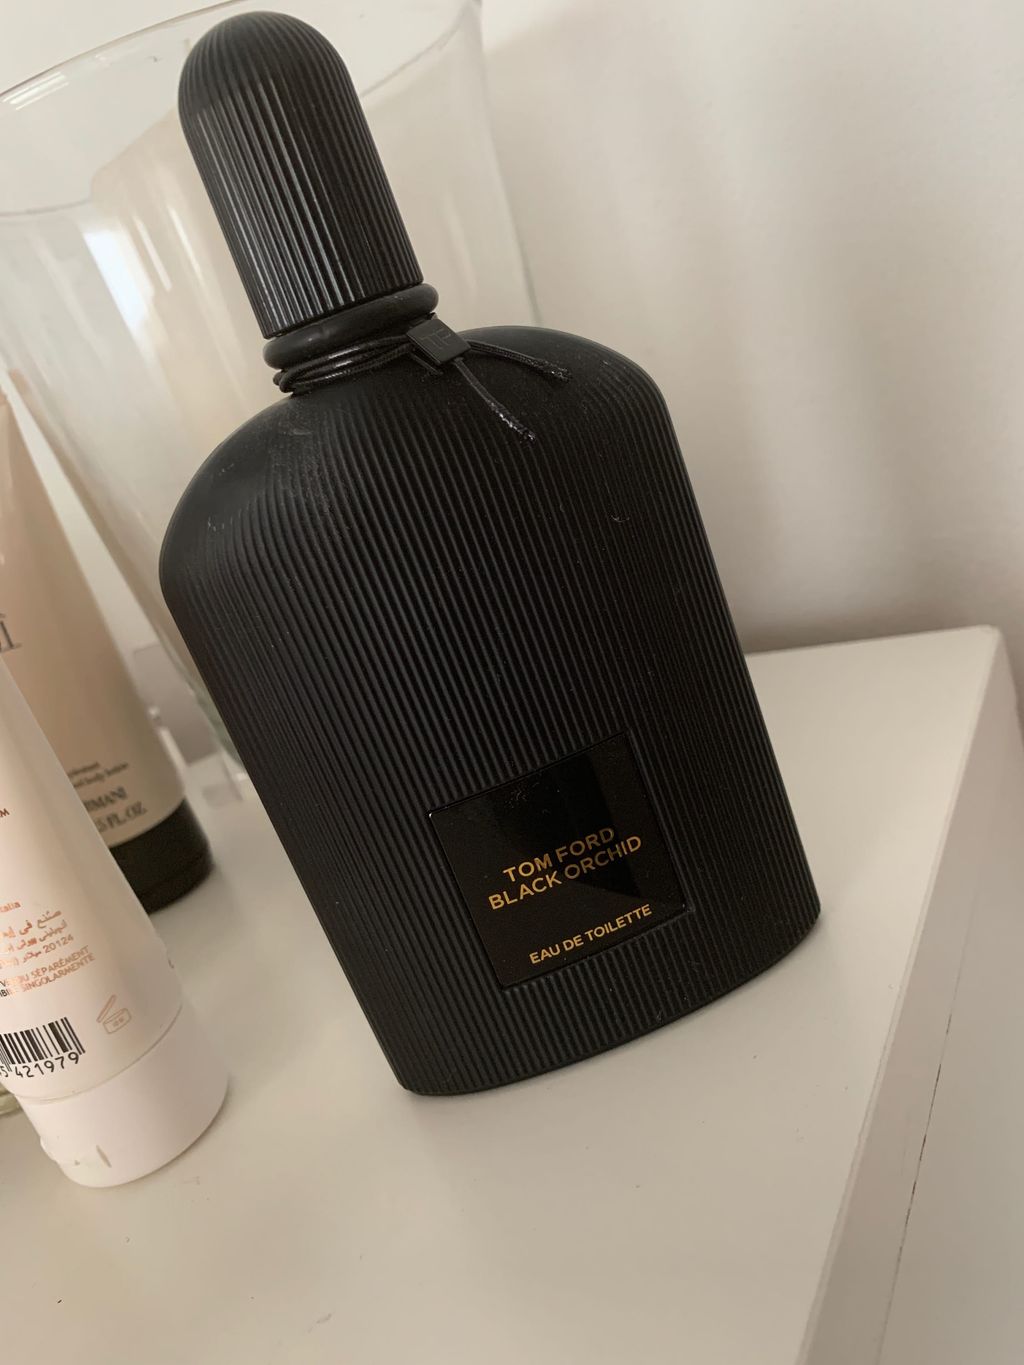 Tom Ford Black Orchid edt